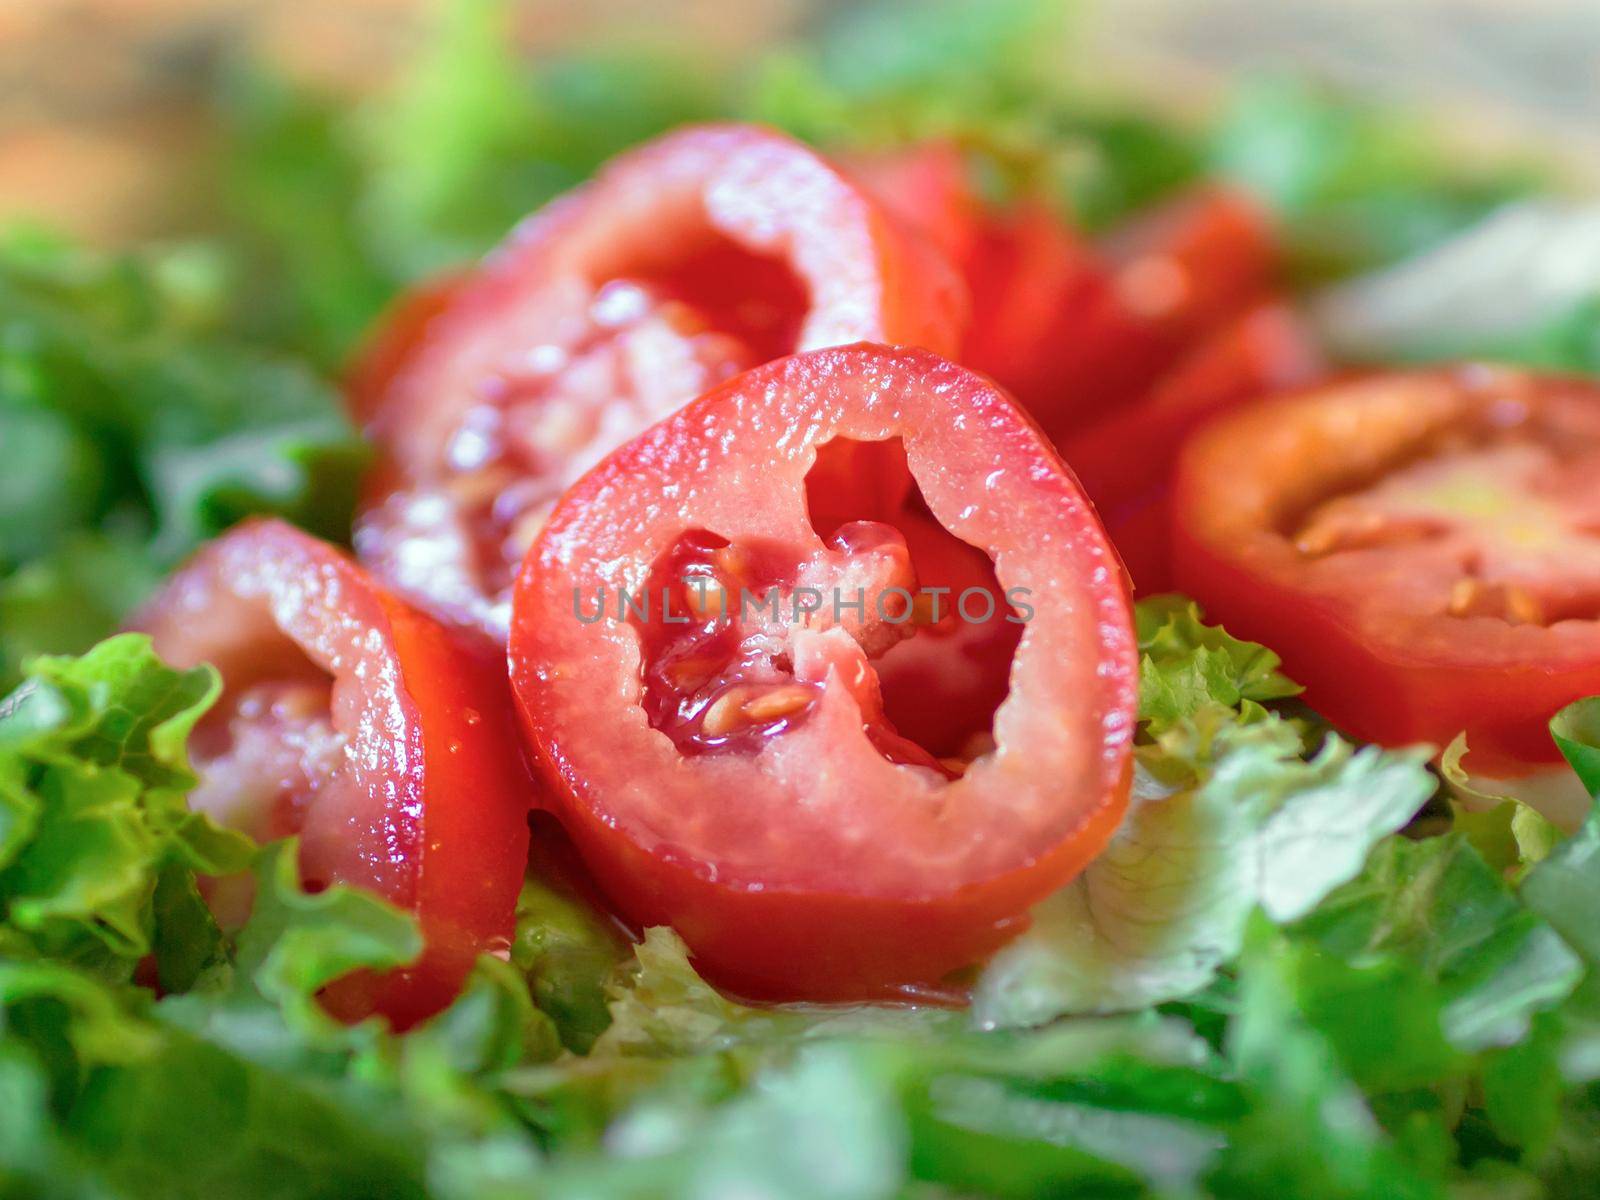 Salad with lettuce and fresh tomatoes.